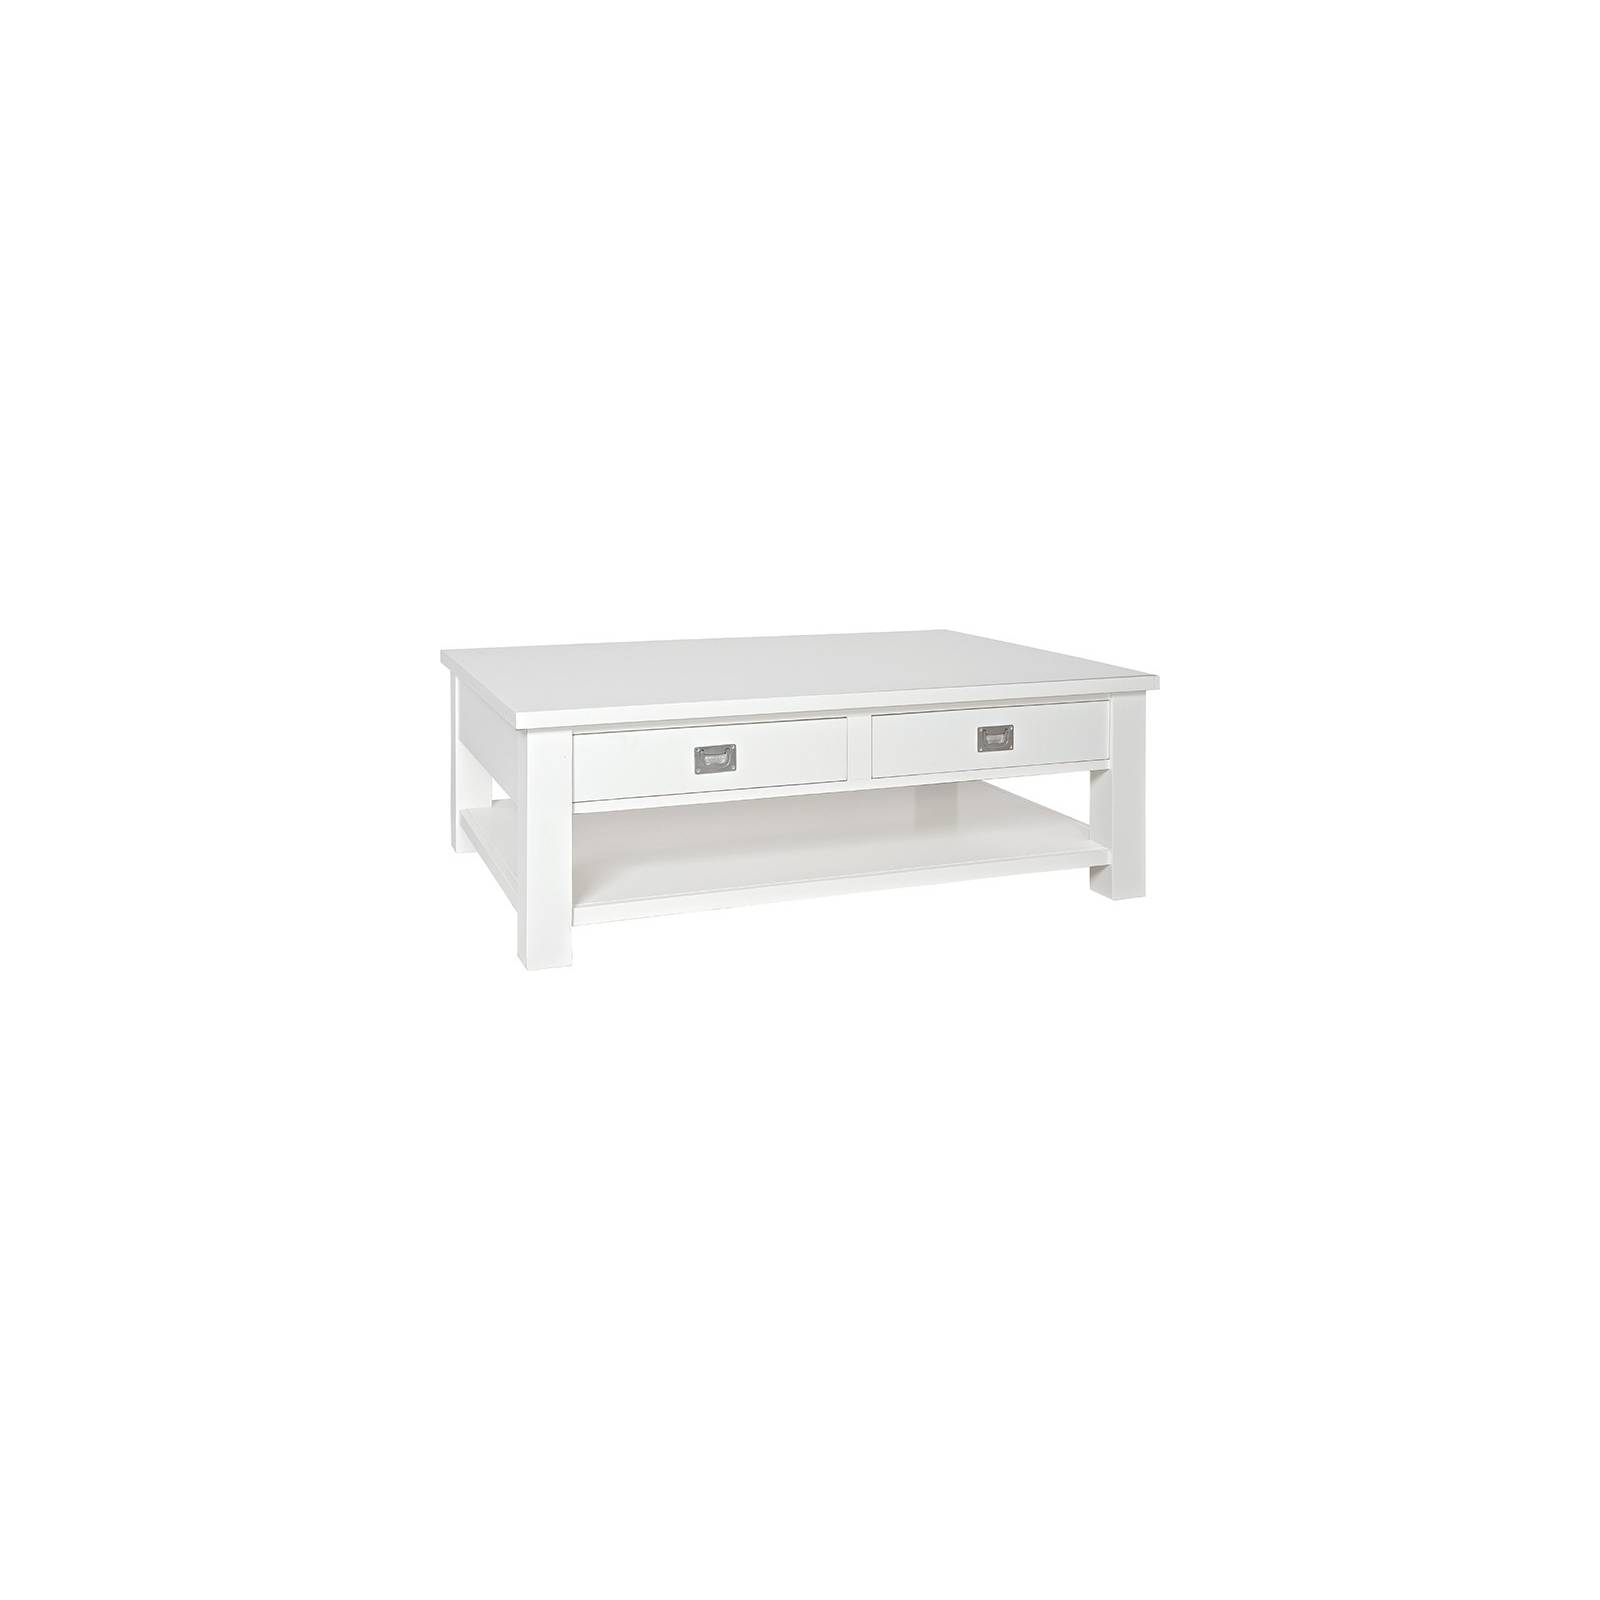 Table Basse Rectangulaire Victoria Pin Massif - meuble shabby chic